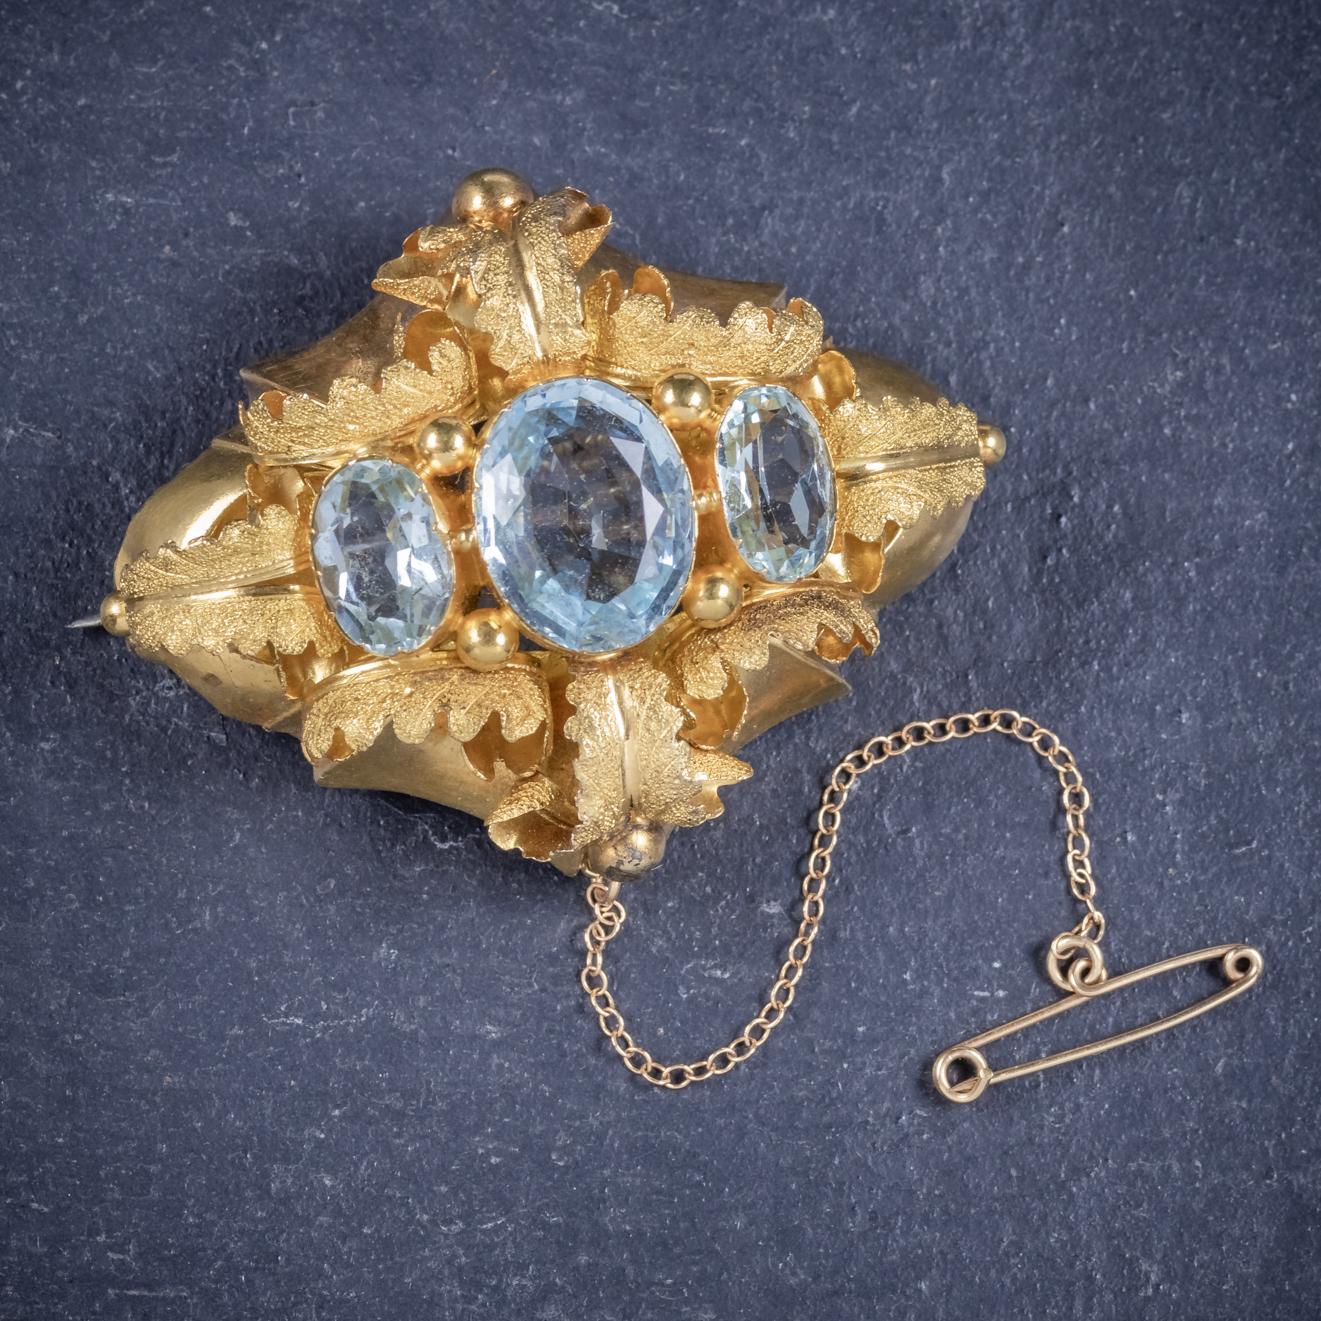 Antique Victorian 18ct Gold Aquamarine Circa 1860 Boxed Brooch And Earrings Set For Sale 1